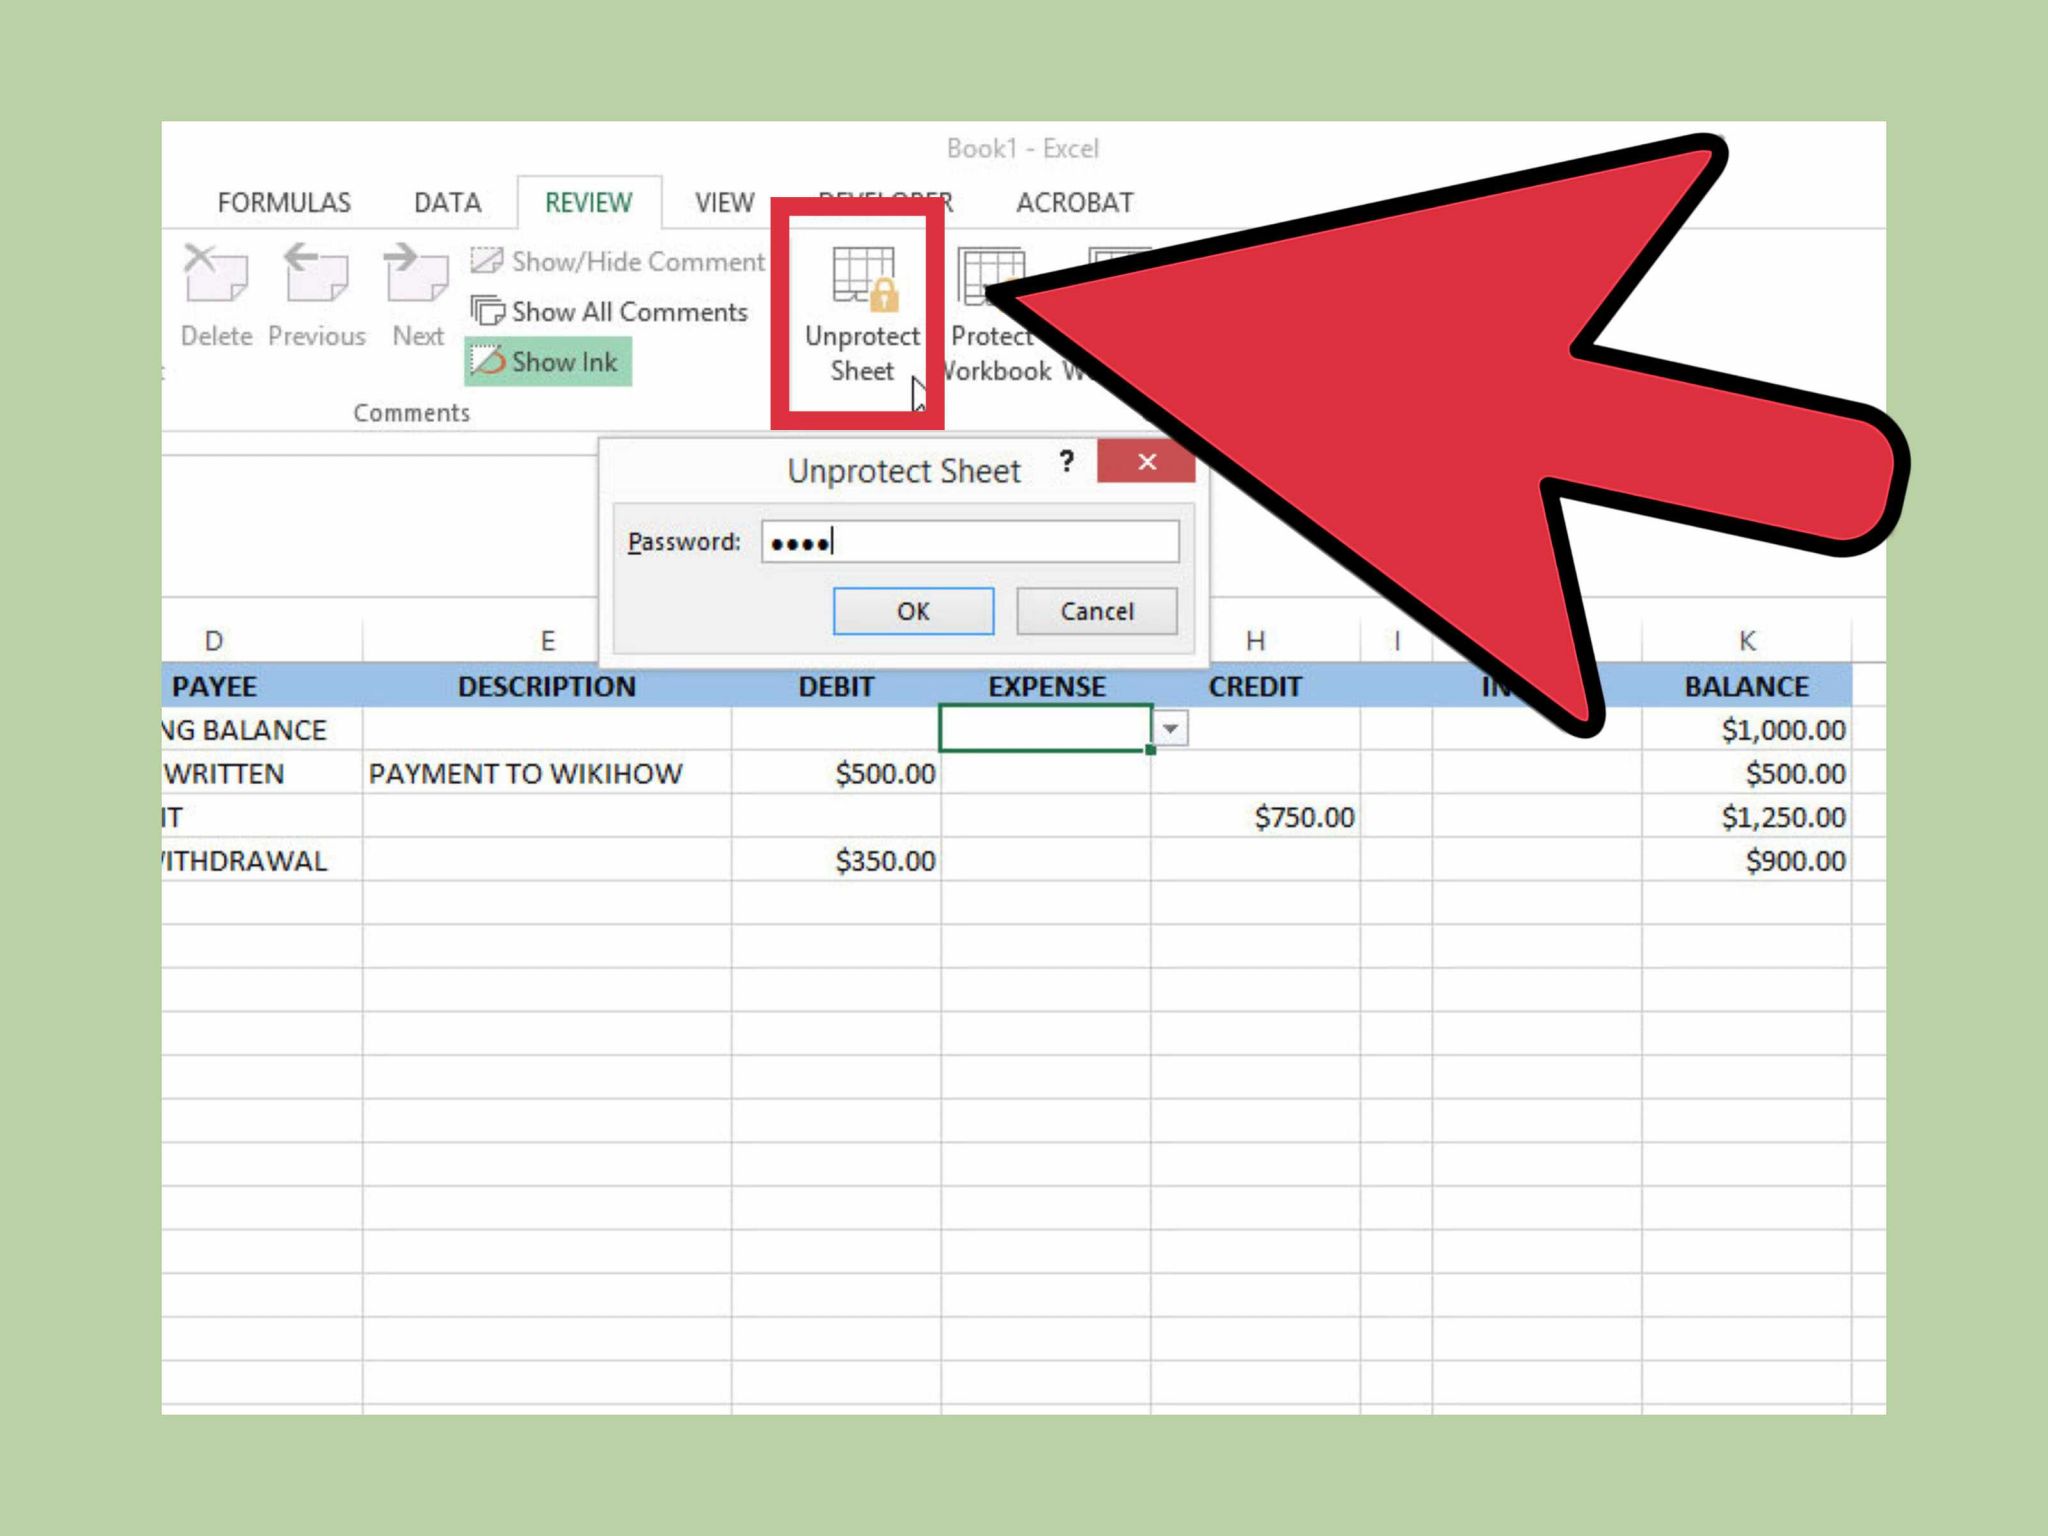 Personal Use Of Company Vehicle Worksheet 2016 as Well as How to Create A Simple Checkbook Register with Microsoft Excel